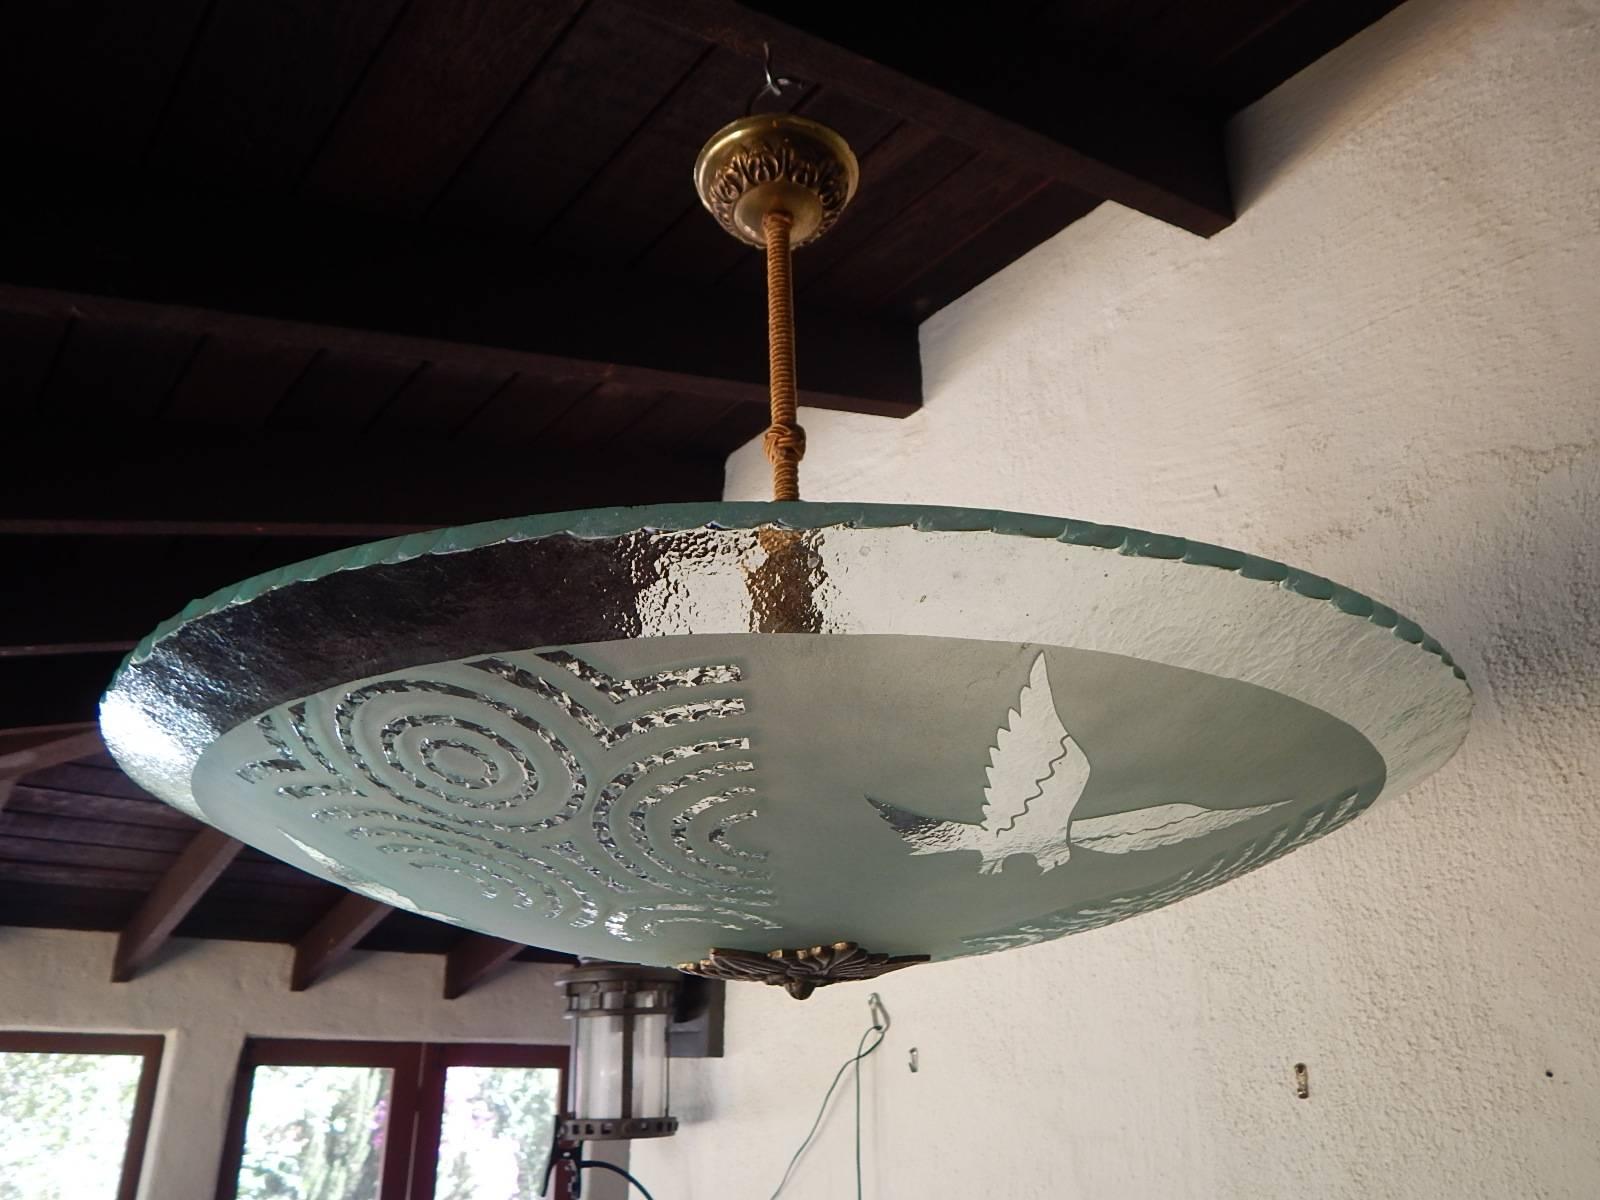 Art Glass Swedish Art Deco Etched Glass Lighting Fixture with Eagle Motif, circa 1930 For Sale